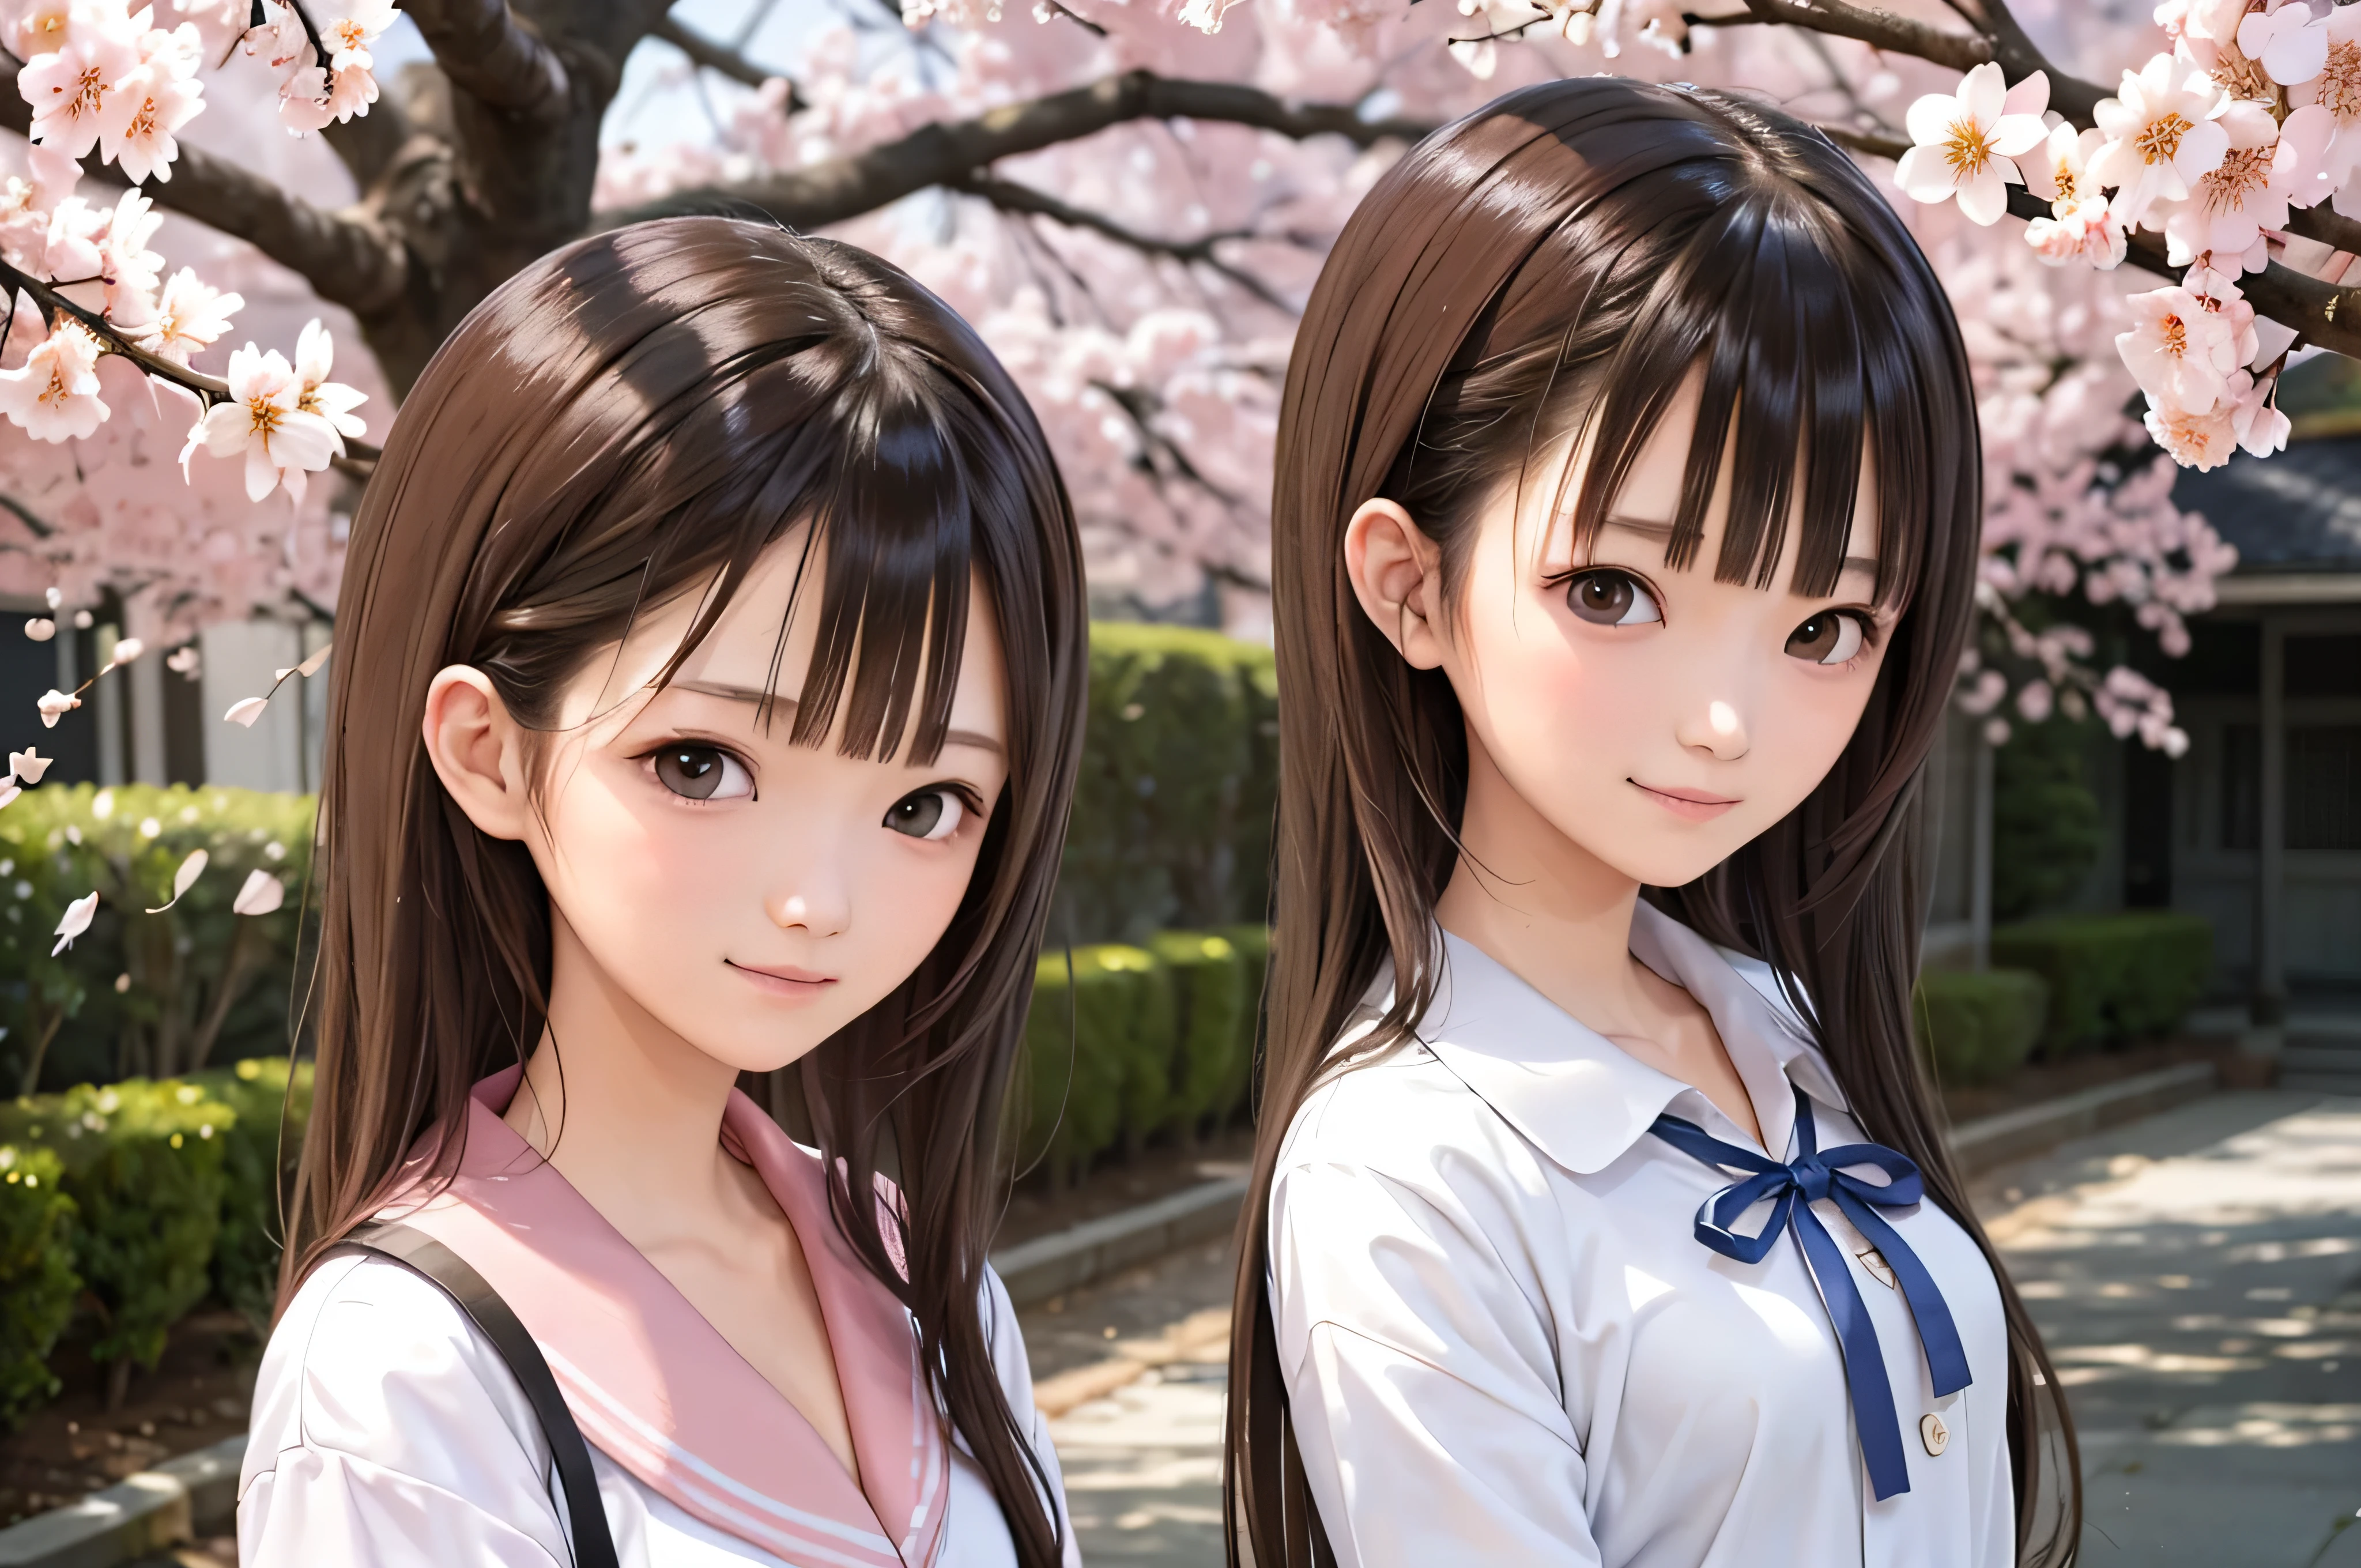 Anime-style portrait of Japanese junior high school girls standing under spring cherry blossoms. she is looking to the side, her long brown hair blows in the wind. The girl has a calm expression, While watching the cherry blossom snowstorm illuminated by soft pink light. her eyes are black and shining, with a subtle smile. She is wearing a Japanese  with a white blouse and a navy blue cardigan。。, Shining in the soft spring sunlight. The girl is depicted small in the frame. in the background, Bright pink cherry blossom branches are blurred. A scene of tranquility, bright, and peaceful atmosphere, Reminds you of the beautiful moments of Japanese anime.